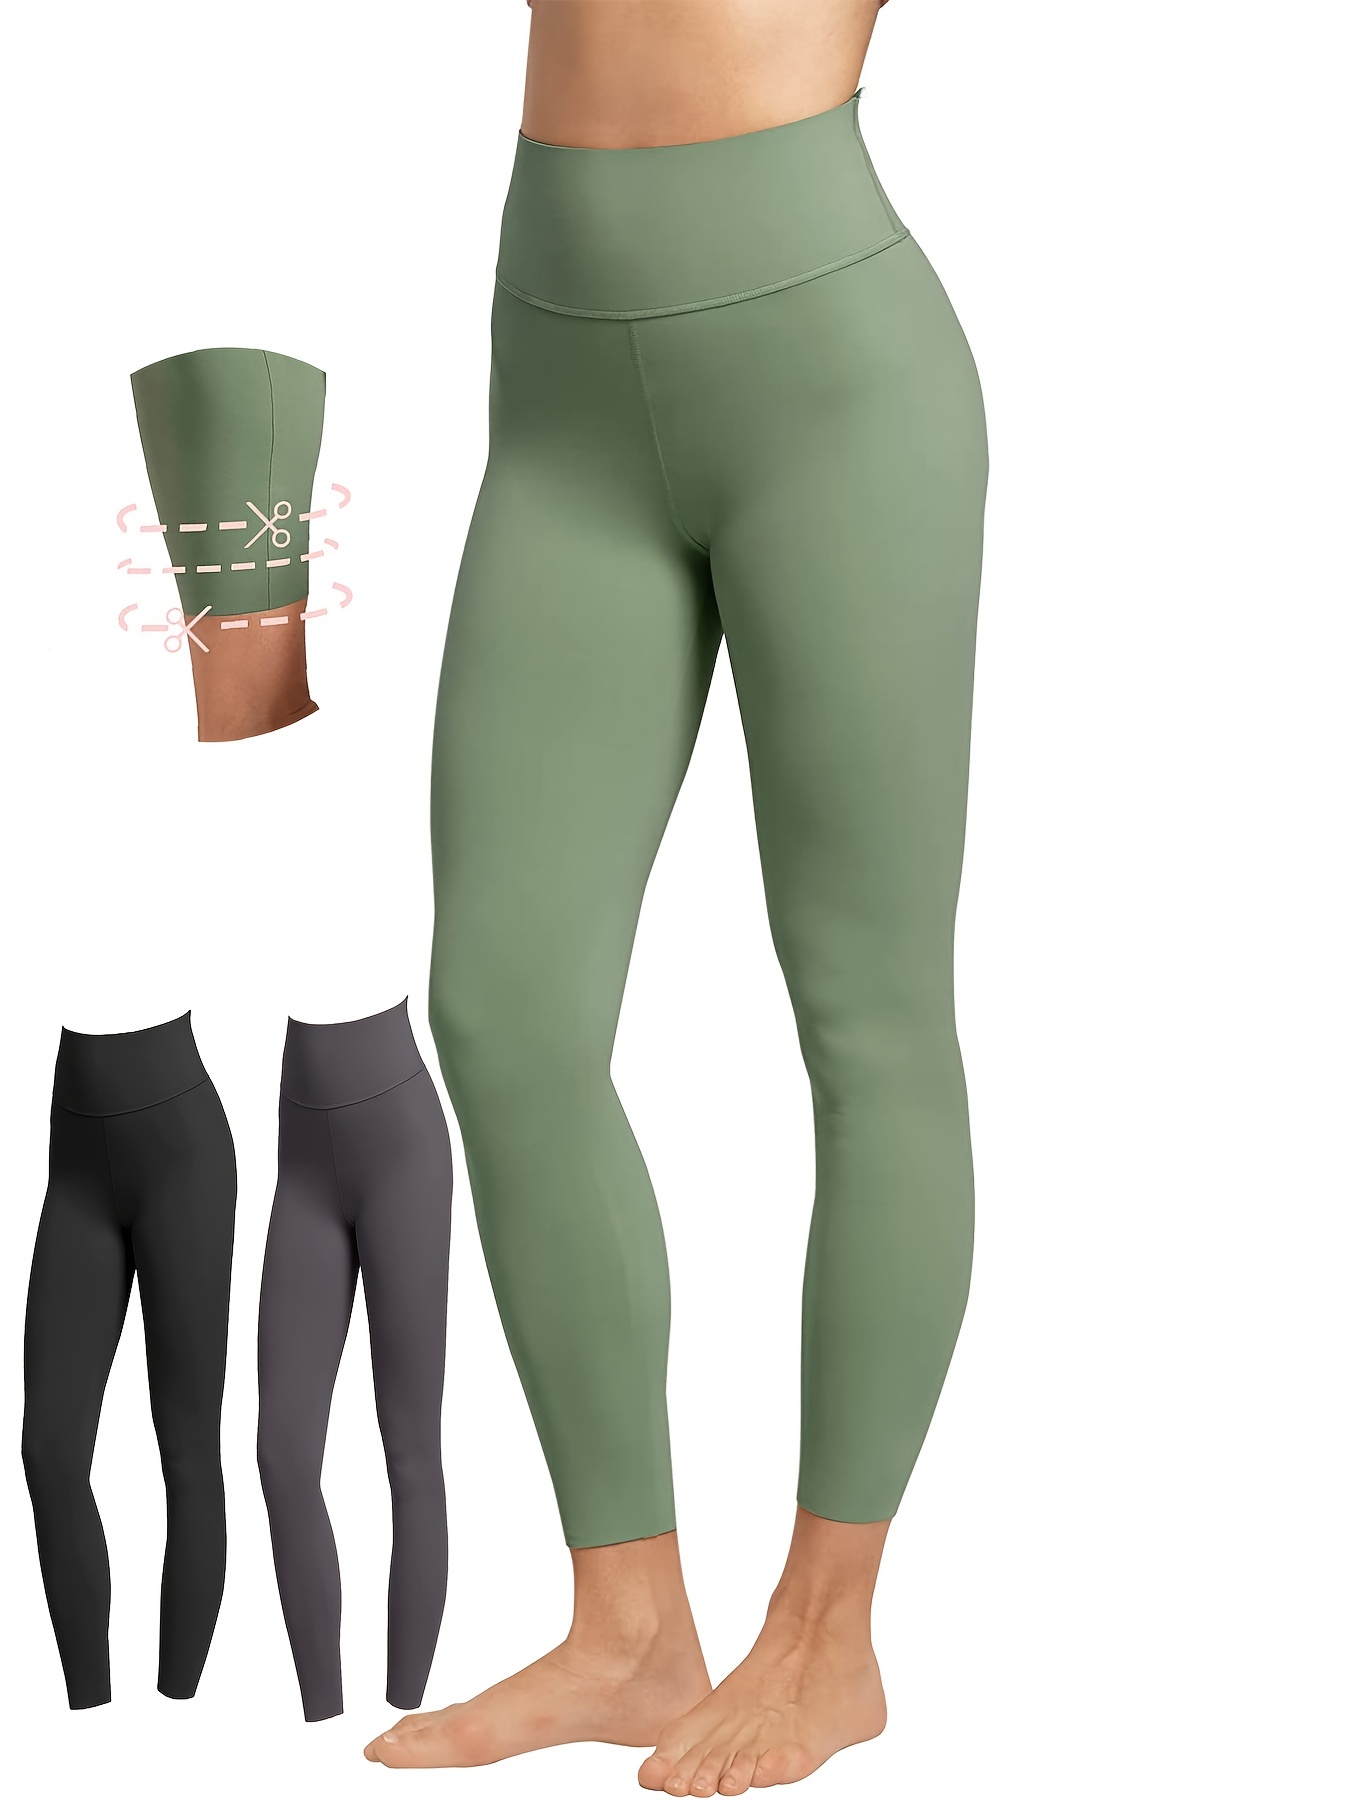 High-Waist Sweat Absorption Yoga Leggings - Buttery Soft and Stretchy